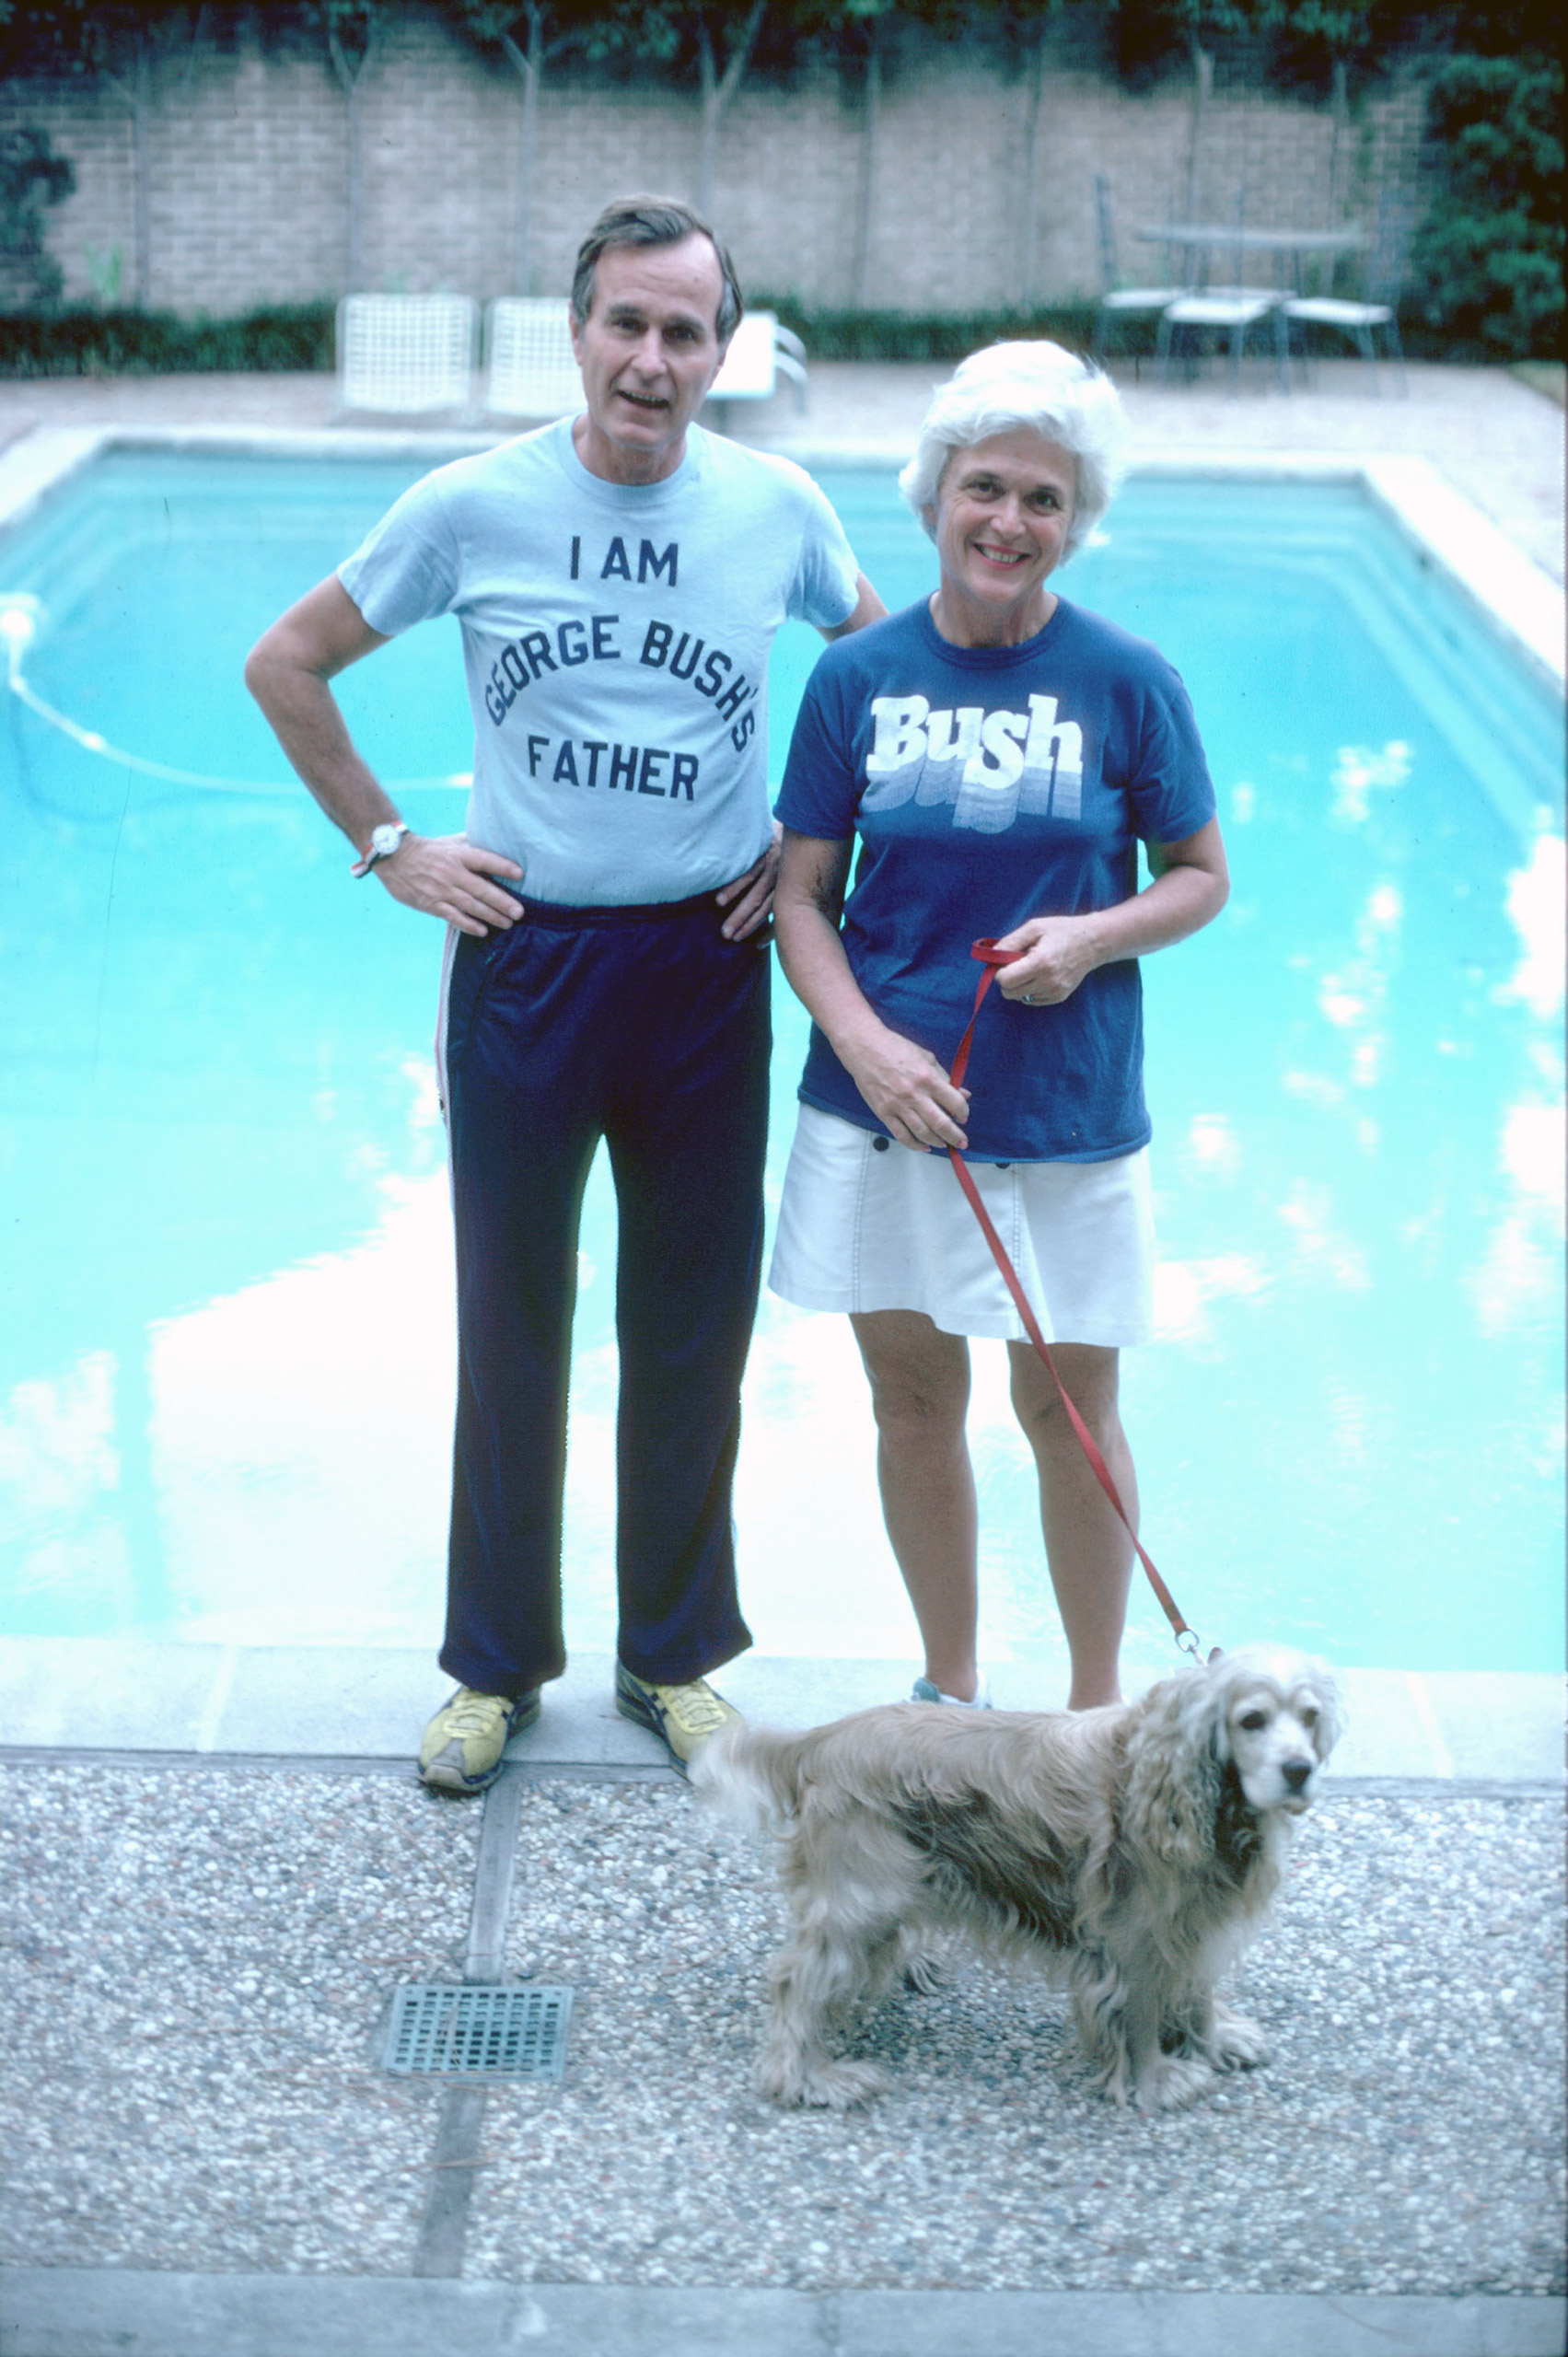 Republican Presidential candidate George H.W. Bush, wearing a t-shirt referencing his son George W. Bush, stands with his wife Barbara in Nov. 1978 in Texas.